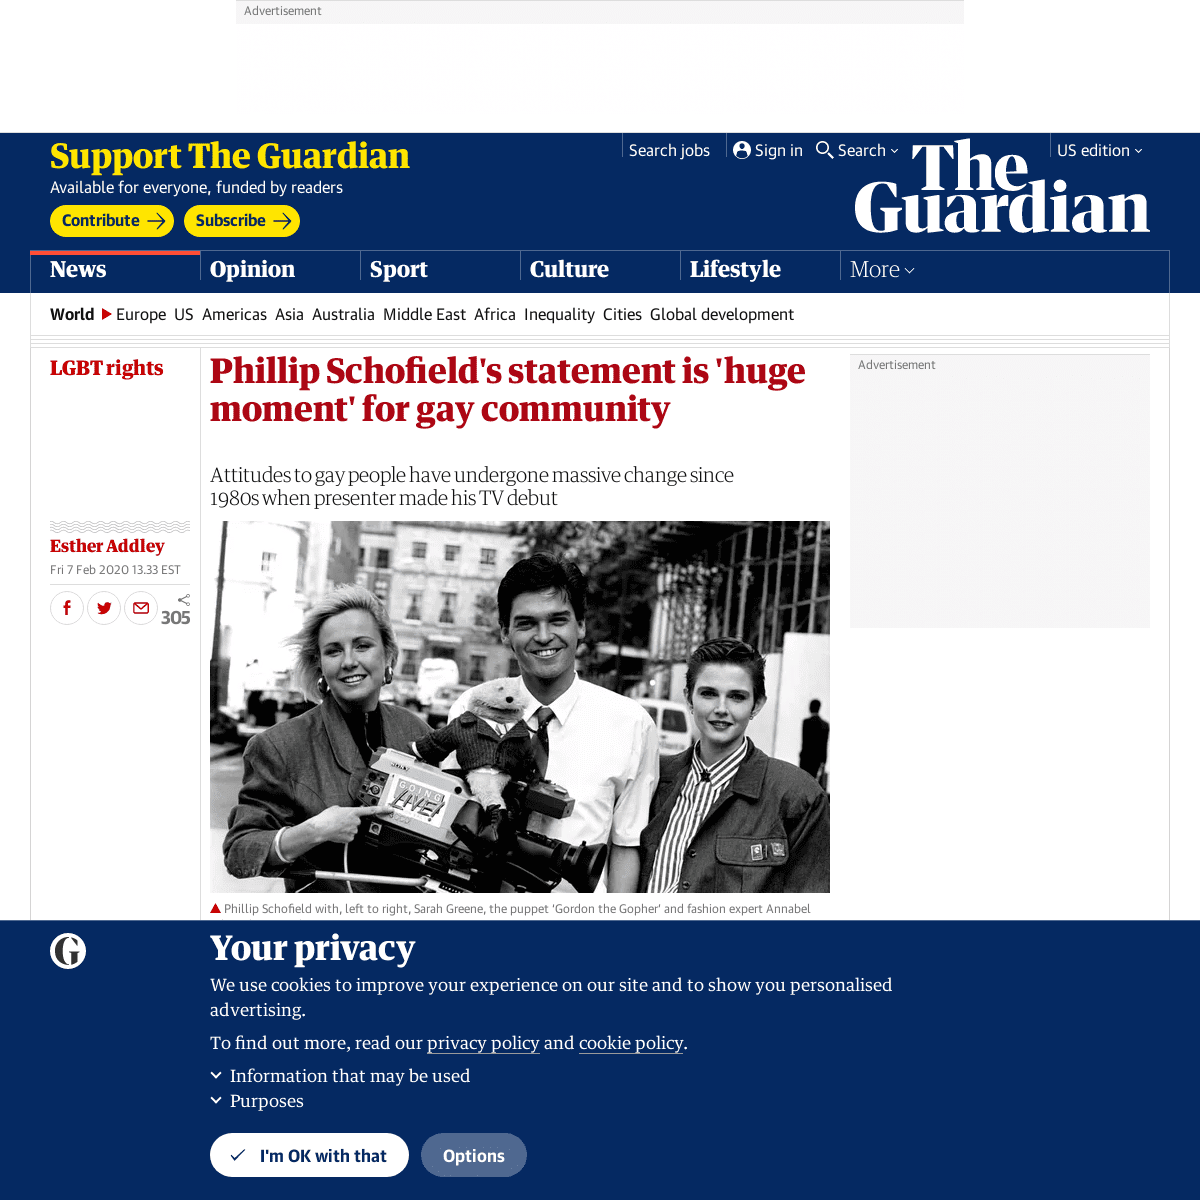 A complete backup of www.theguardian.com/media/2020/feb/07/phillip-schofields-statement-is-huge-moment-for-gay-community